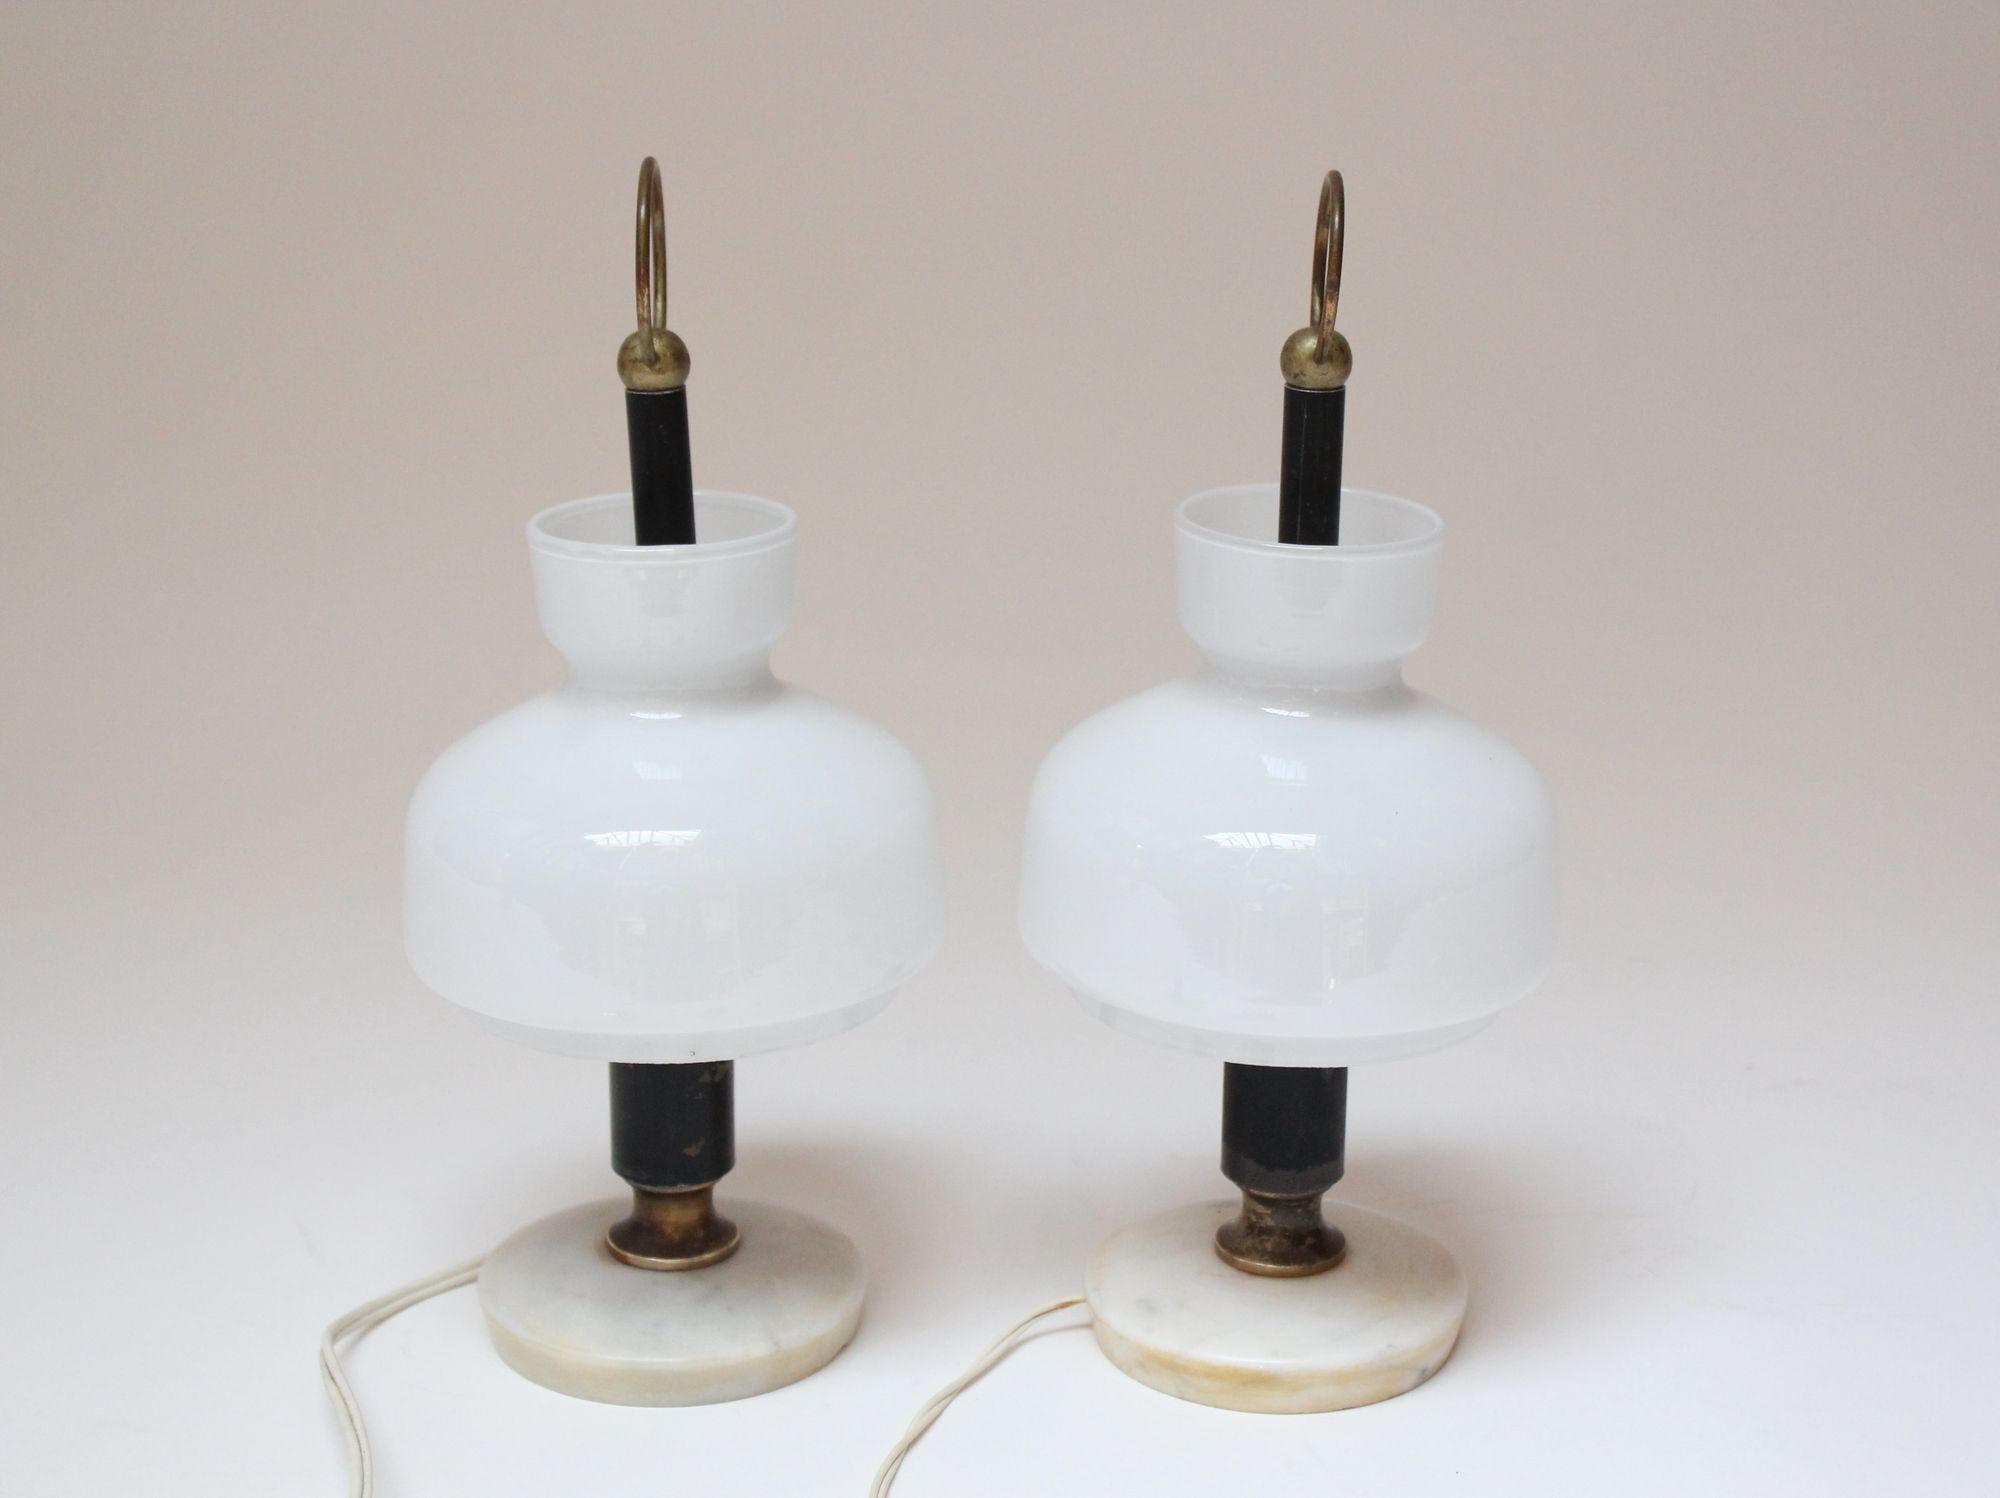 Pair of charming, petite bedside/table lamps (ca. 1950, Italy). Composed of sculptural cased white glass shades with black lacquered metal stems, brass accents, and round, marble bases.
Reminiscent of the Arenzano table lamp by Ignazio Gardella, but